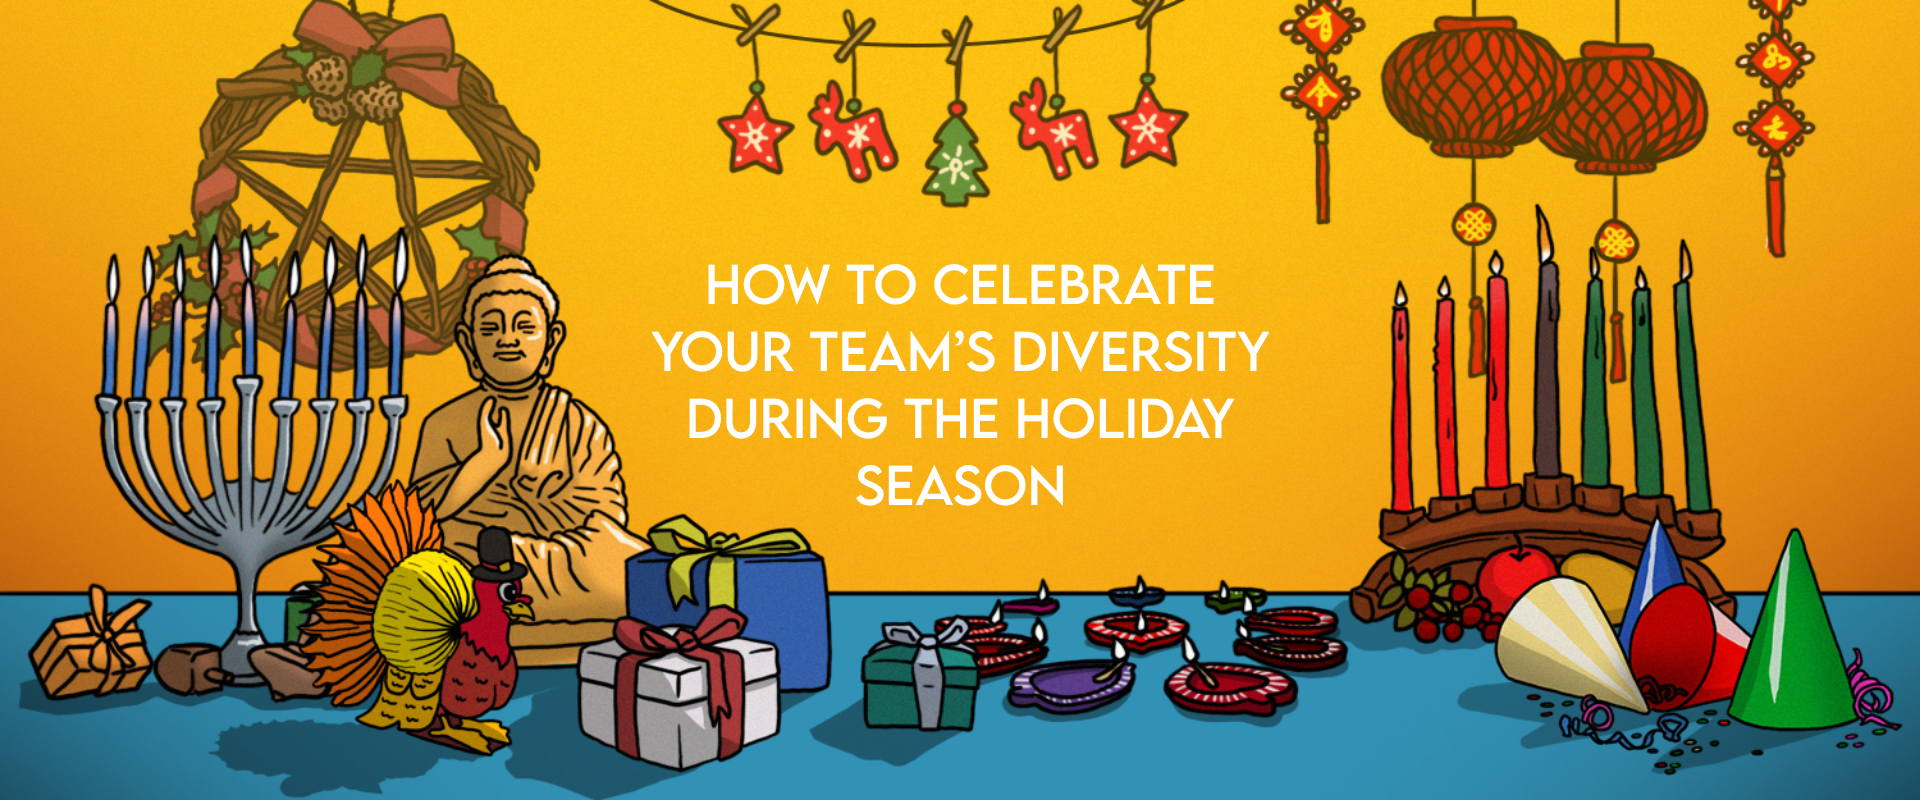 How to Celebrate Your Team's Diversity During the Holiday Season